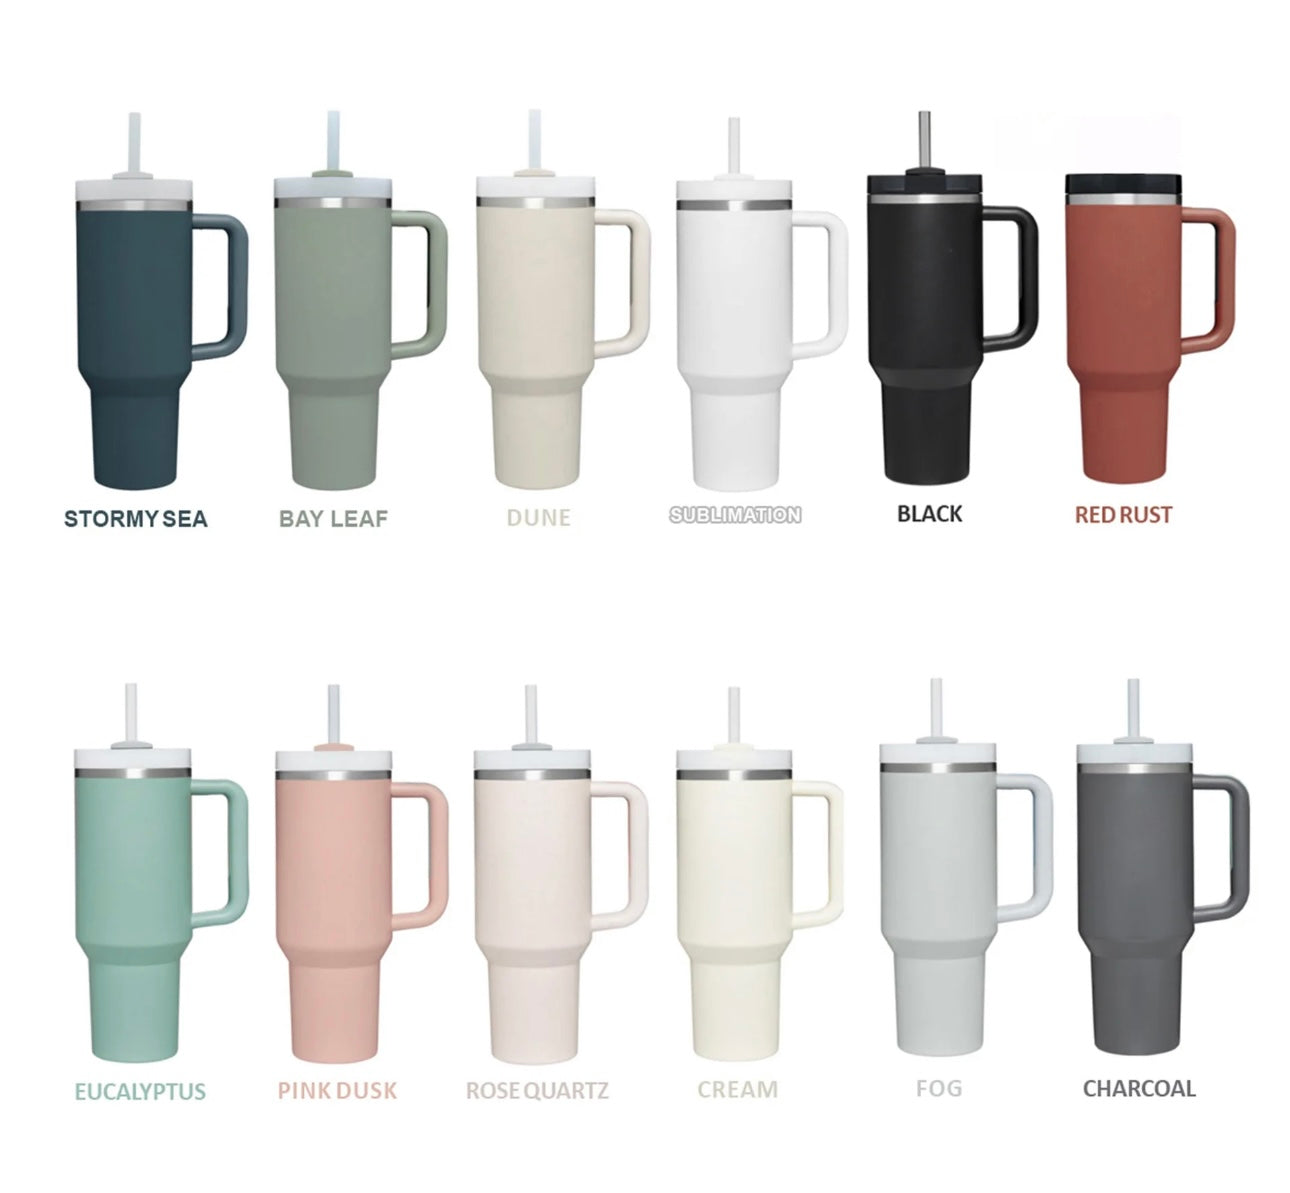 V2 40oz Dupe Tumbler With New Colours